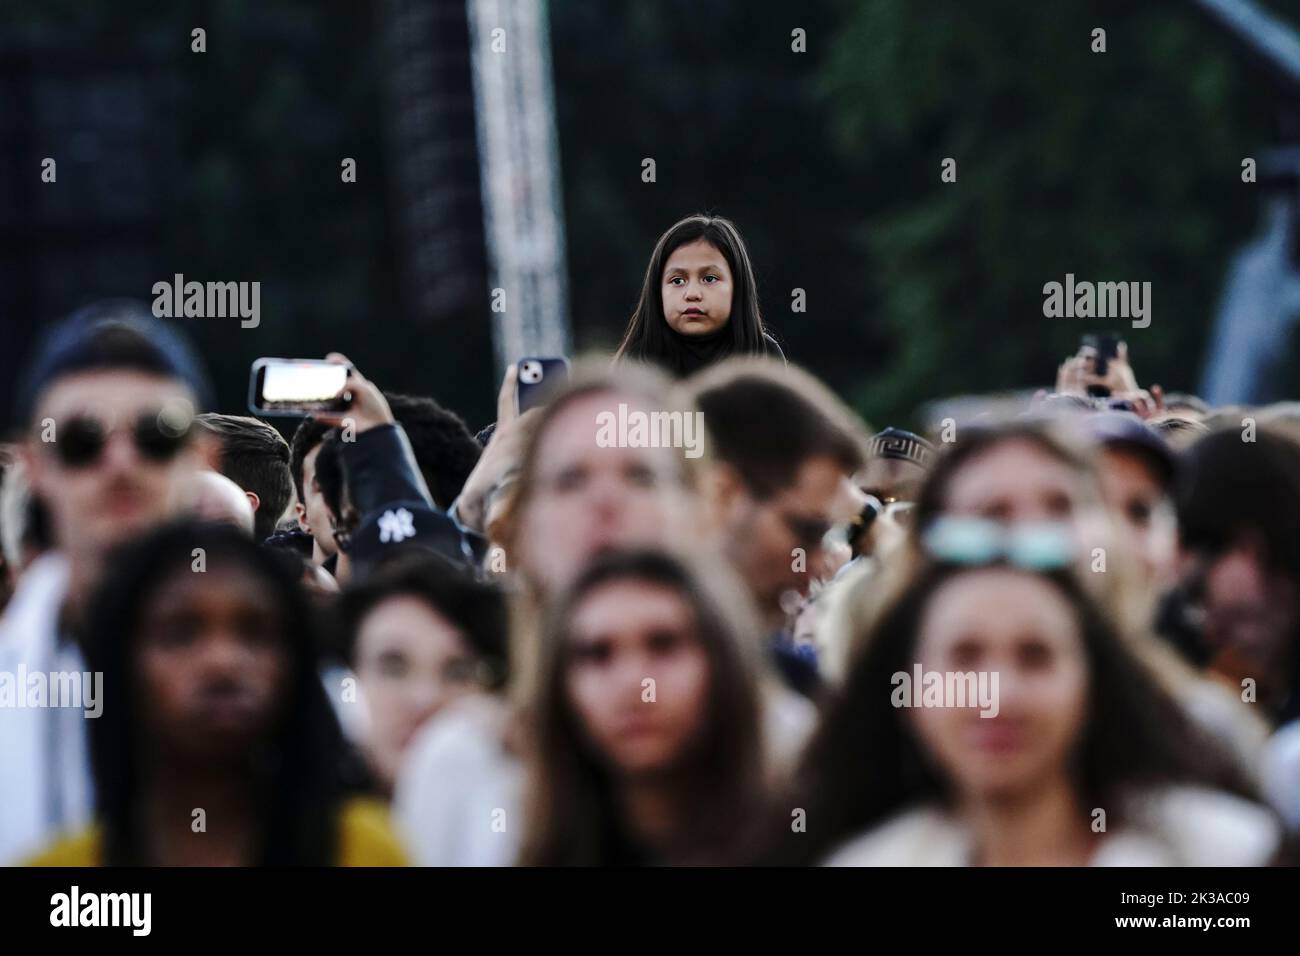 New York, NY - September 24, 2022: Spectors attend Global Citizen Festival NYC in Central Park Stock Photo